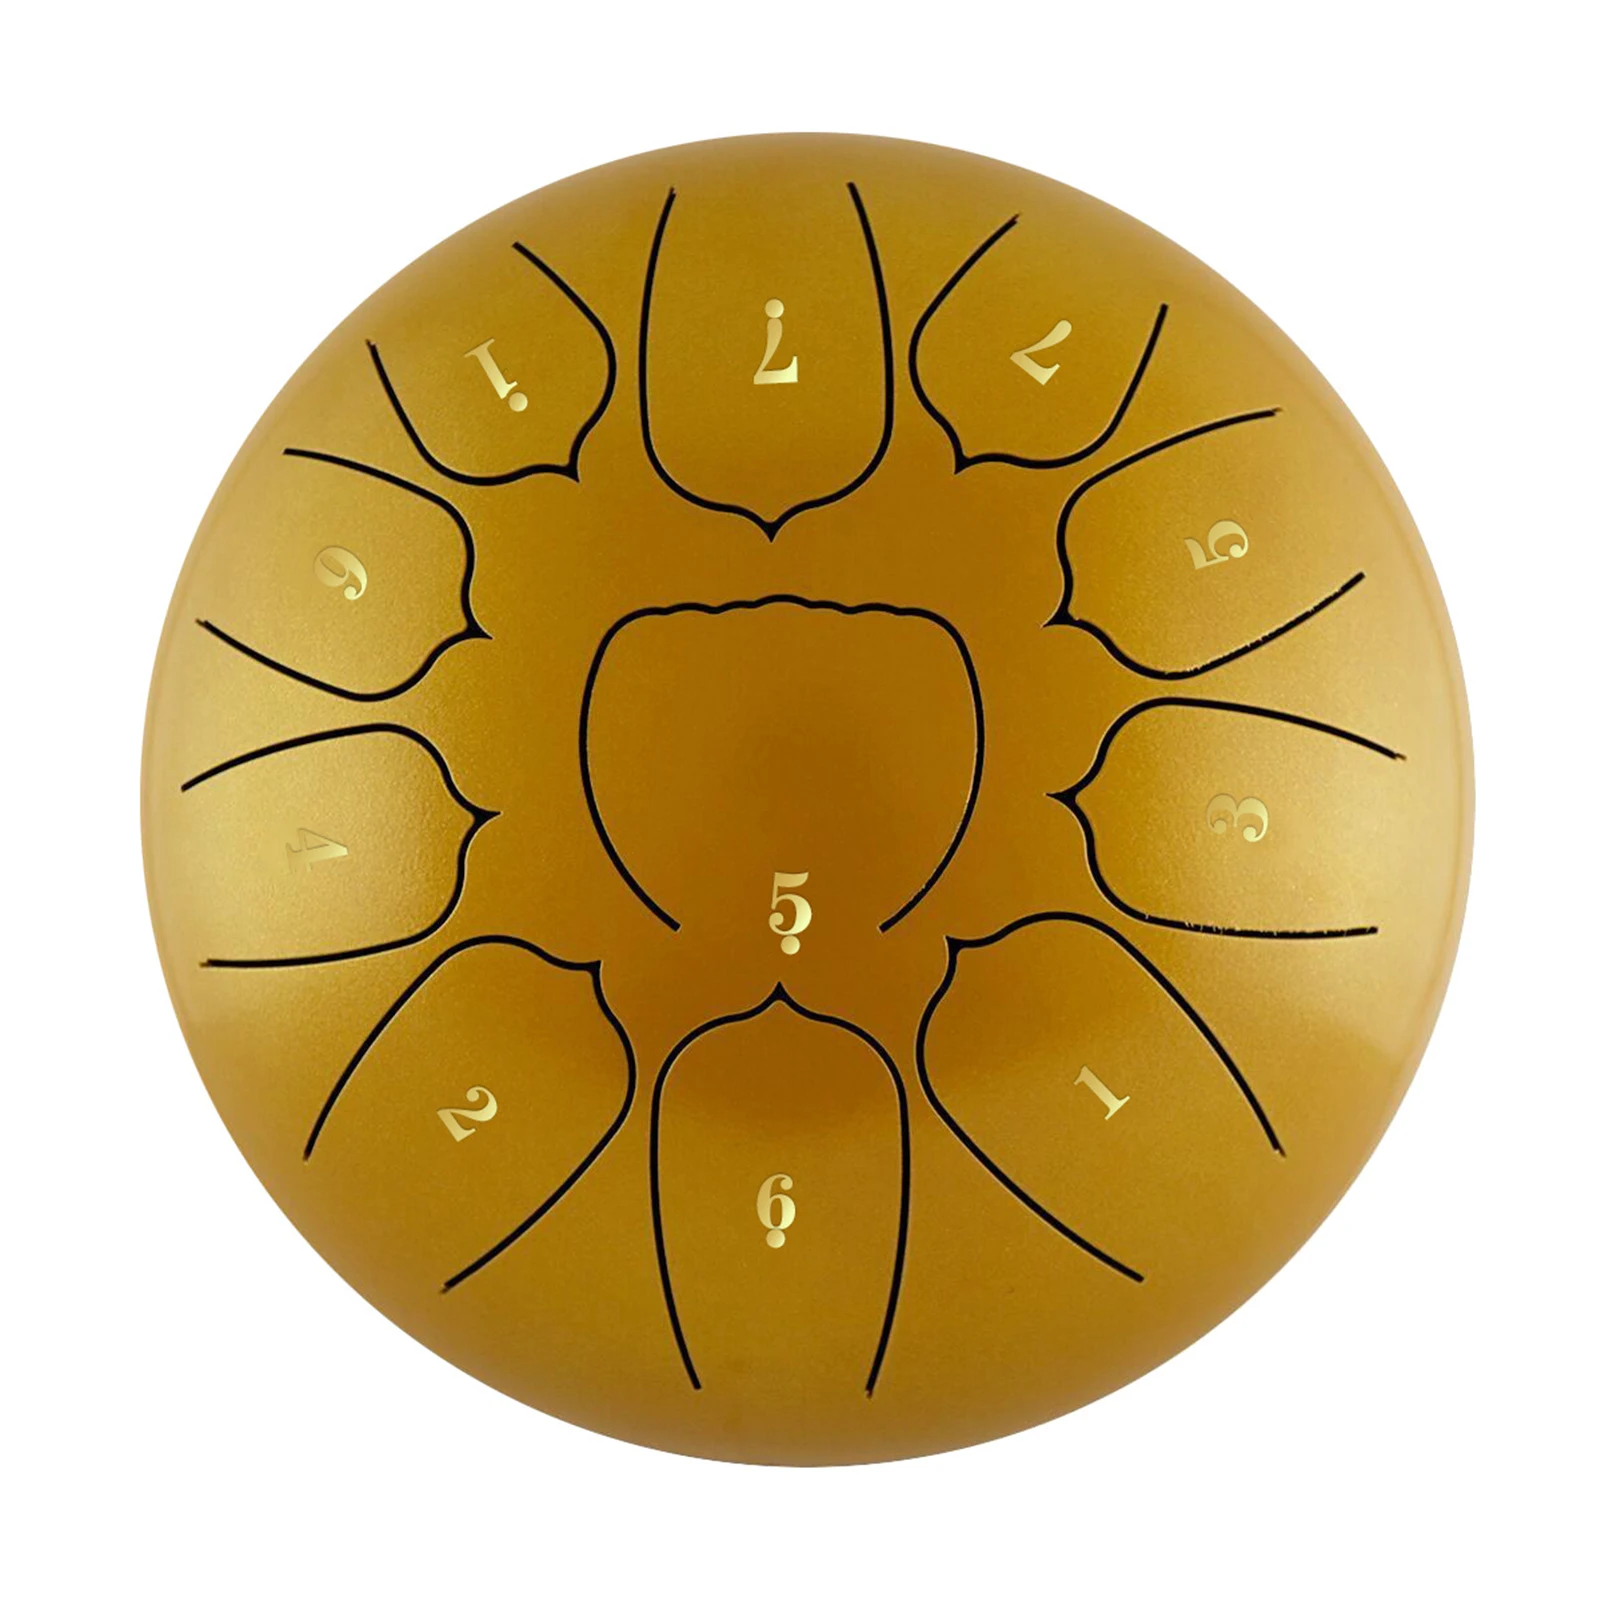 

6 Inch Steel Tongue Drum 11 Notes Handpan Drum with Drum Mallet Finger Picks Percussion for Meditation Yoga